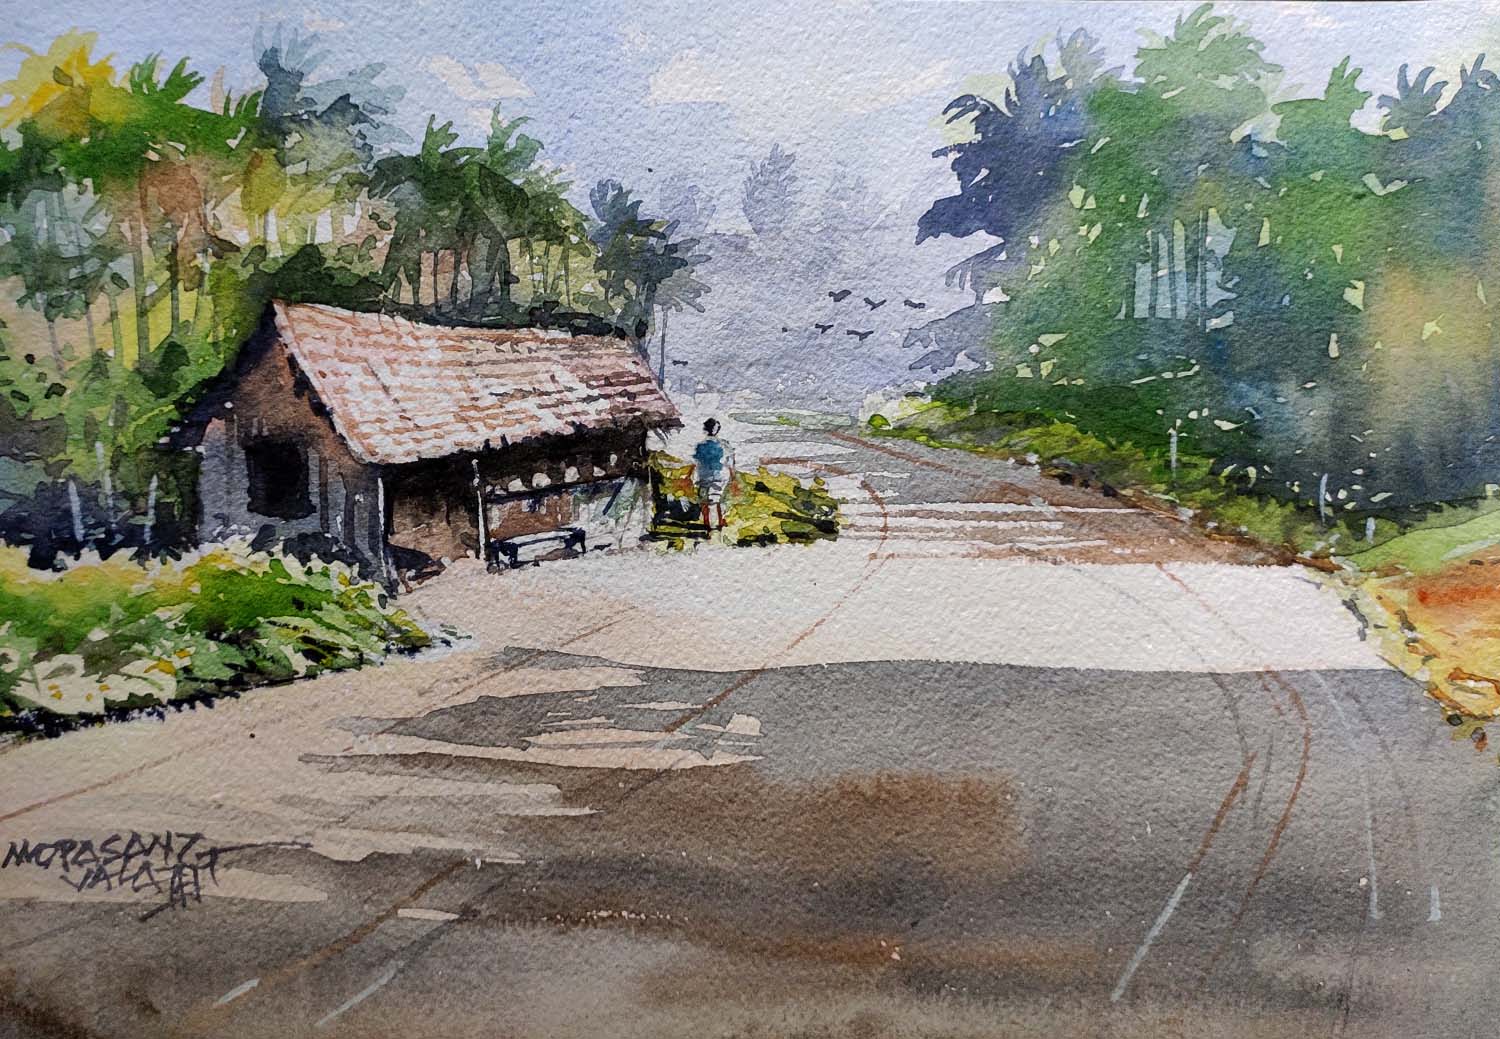 Watercolor painting on the daily life of a village.